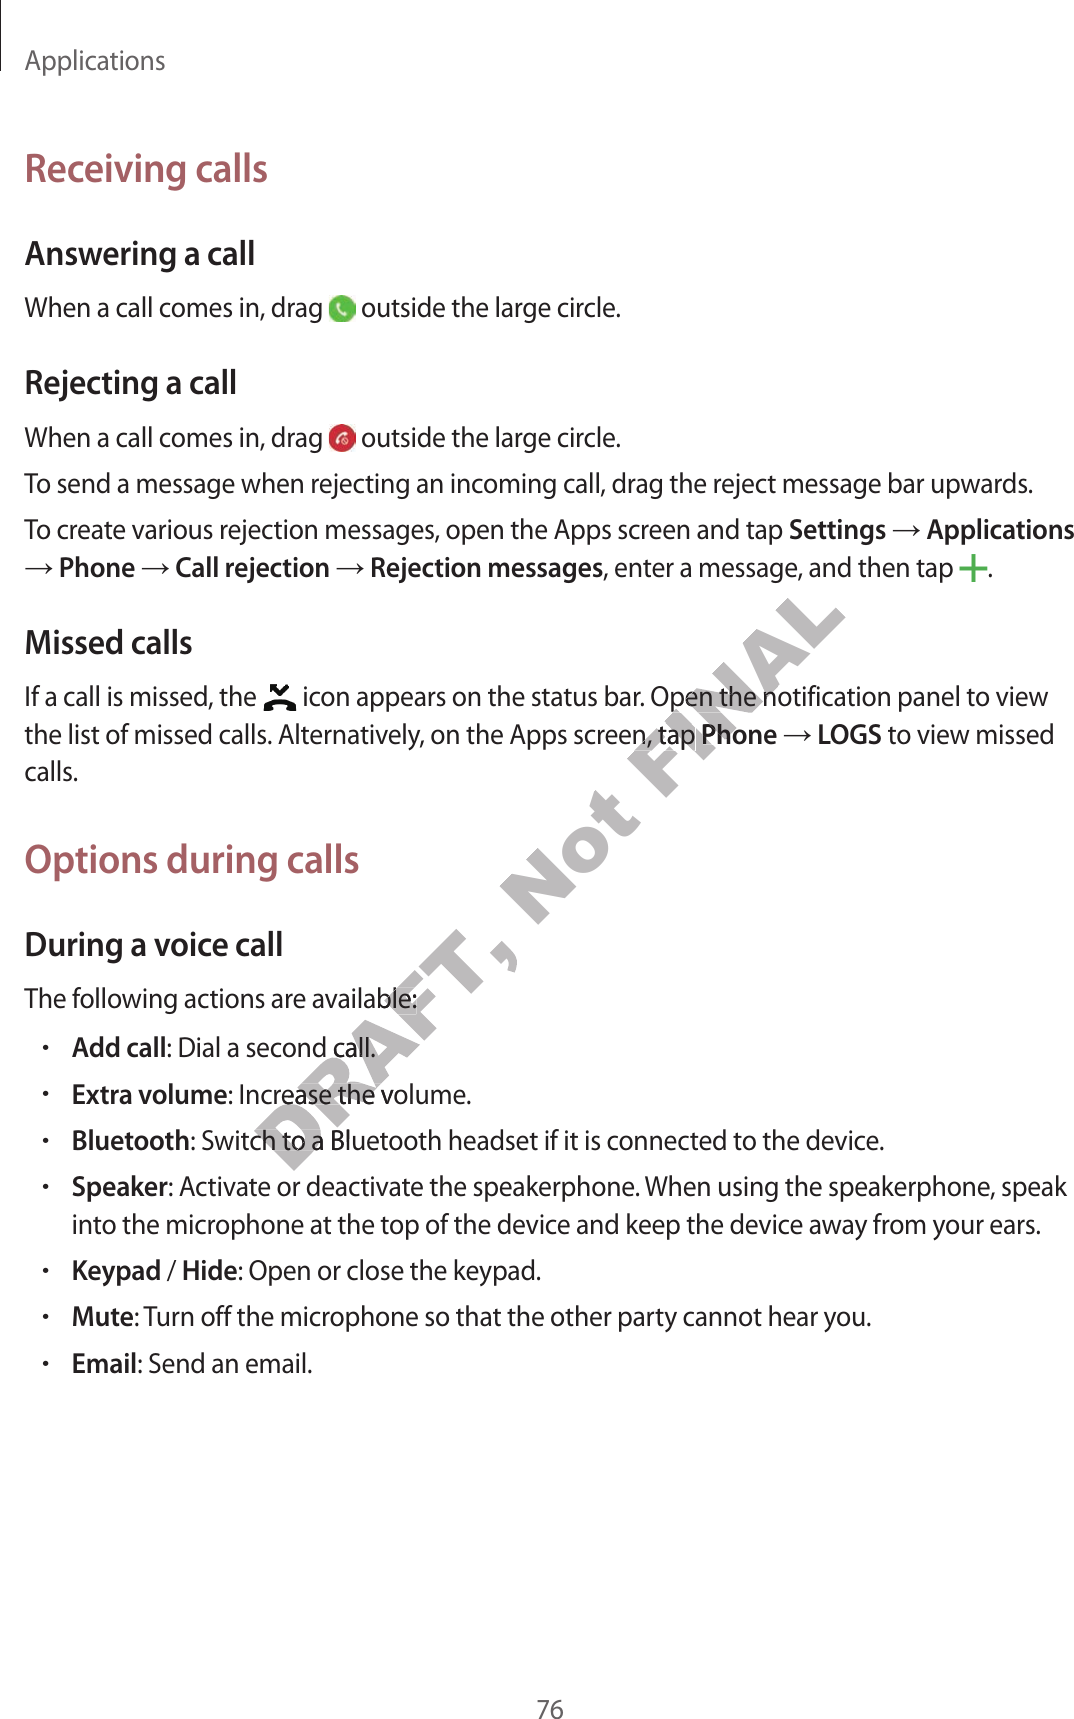 Applications76Receiving callsAnsw ering a callWhen a call comes in, drag   outside the large cir cle .Rejecting a callWhen a call comes in, drag   outside the large cir cle .To send a message when rejecting an incoming call, dr ag the r eject message bar upwards .To creat e various r ejection messages, open the Apps scr een and tap Settings  Applications  Phone  Call r ejection  Rejection messages, enter a message , and then tap  .Missed callsIf a call is missed, the   icon appears on the status bar. Open the notification panel to view the list of missed calls. Alt ernativ ely, on the Apps screen, tap Phone  LOGS to view missed calls.Options during callsDuring a voic e callThe f ollowing actions are a vailable:•Add call: Dial a second call.•Extra volume: Increase the volume .•Bluetooth: Switch t o a Bluetooth headset if it is c onnected to the device.•Speaker: Activate or deactivate the speakerphone . When using the speakerphone, speak into the micr ophone at the t op of the device and keep the devic e a wa y fr om y our ears .•Keypad / Hide: Open or close the keypad.•Mute: Turn off the microphone so that the other party cannot hear you.•Email: Send an email.DRAFT, The f ollowing actions are a vailable:DRAFT, The f ollowing actions are a vailable:: Dial a second call.DRAFT, : Dial a second call.: Increase the volume .DRAFT, : Increase the volume .: Switch t o a Bluetooth headset if it is c onnected to the device.DRAFT, : Switch t o a Bluetooth headset if it is c onnected to the device.: Activate or deactivate the speakerphone . When using the speakerphone, speak DRAFT, : Activate or deactivate the speakerphone . When using the speakerphone, speak Not FINAL, enter a message , and then tap FINAL, enter a message , and then tap  icon appears on the status bar. Open the notification panel to view FINAL icon appears on the status bar. Open the notification panel to view the list of missed calls. Alt ernativ ely, on the Apps screen, tap FINALthe list of missed calls. Alt ernativ ely, on the Apps screen, tap PhoneFINALPhone